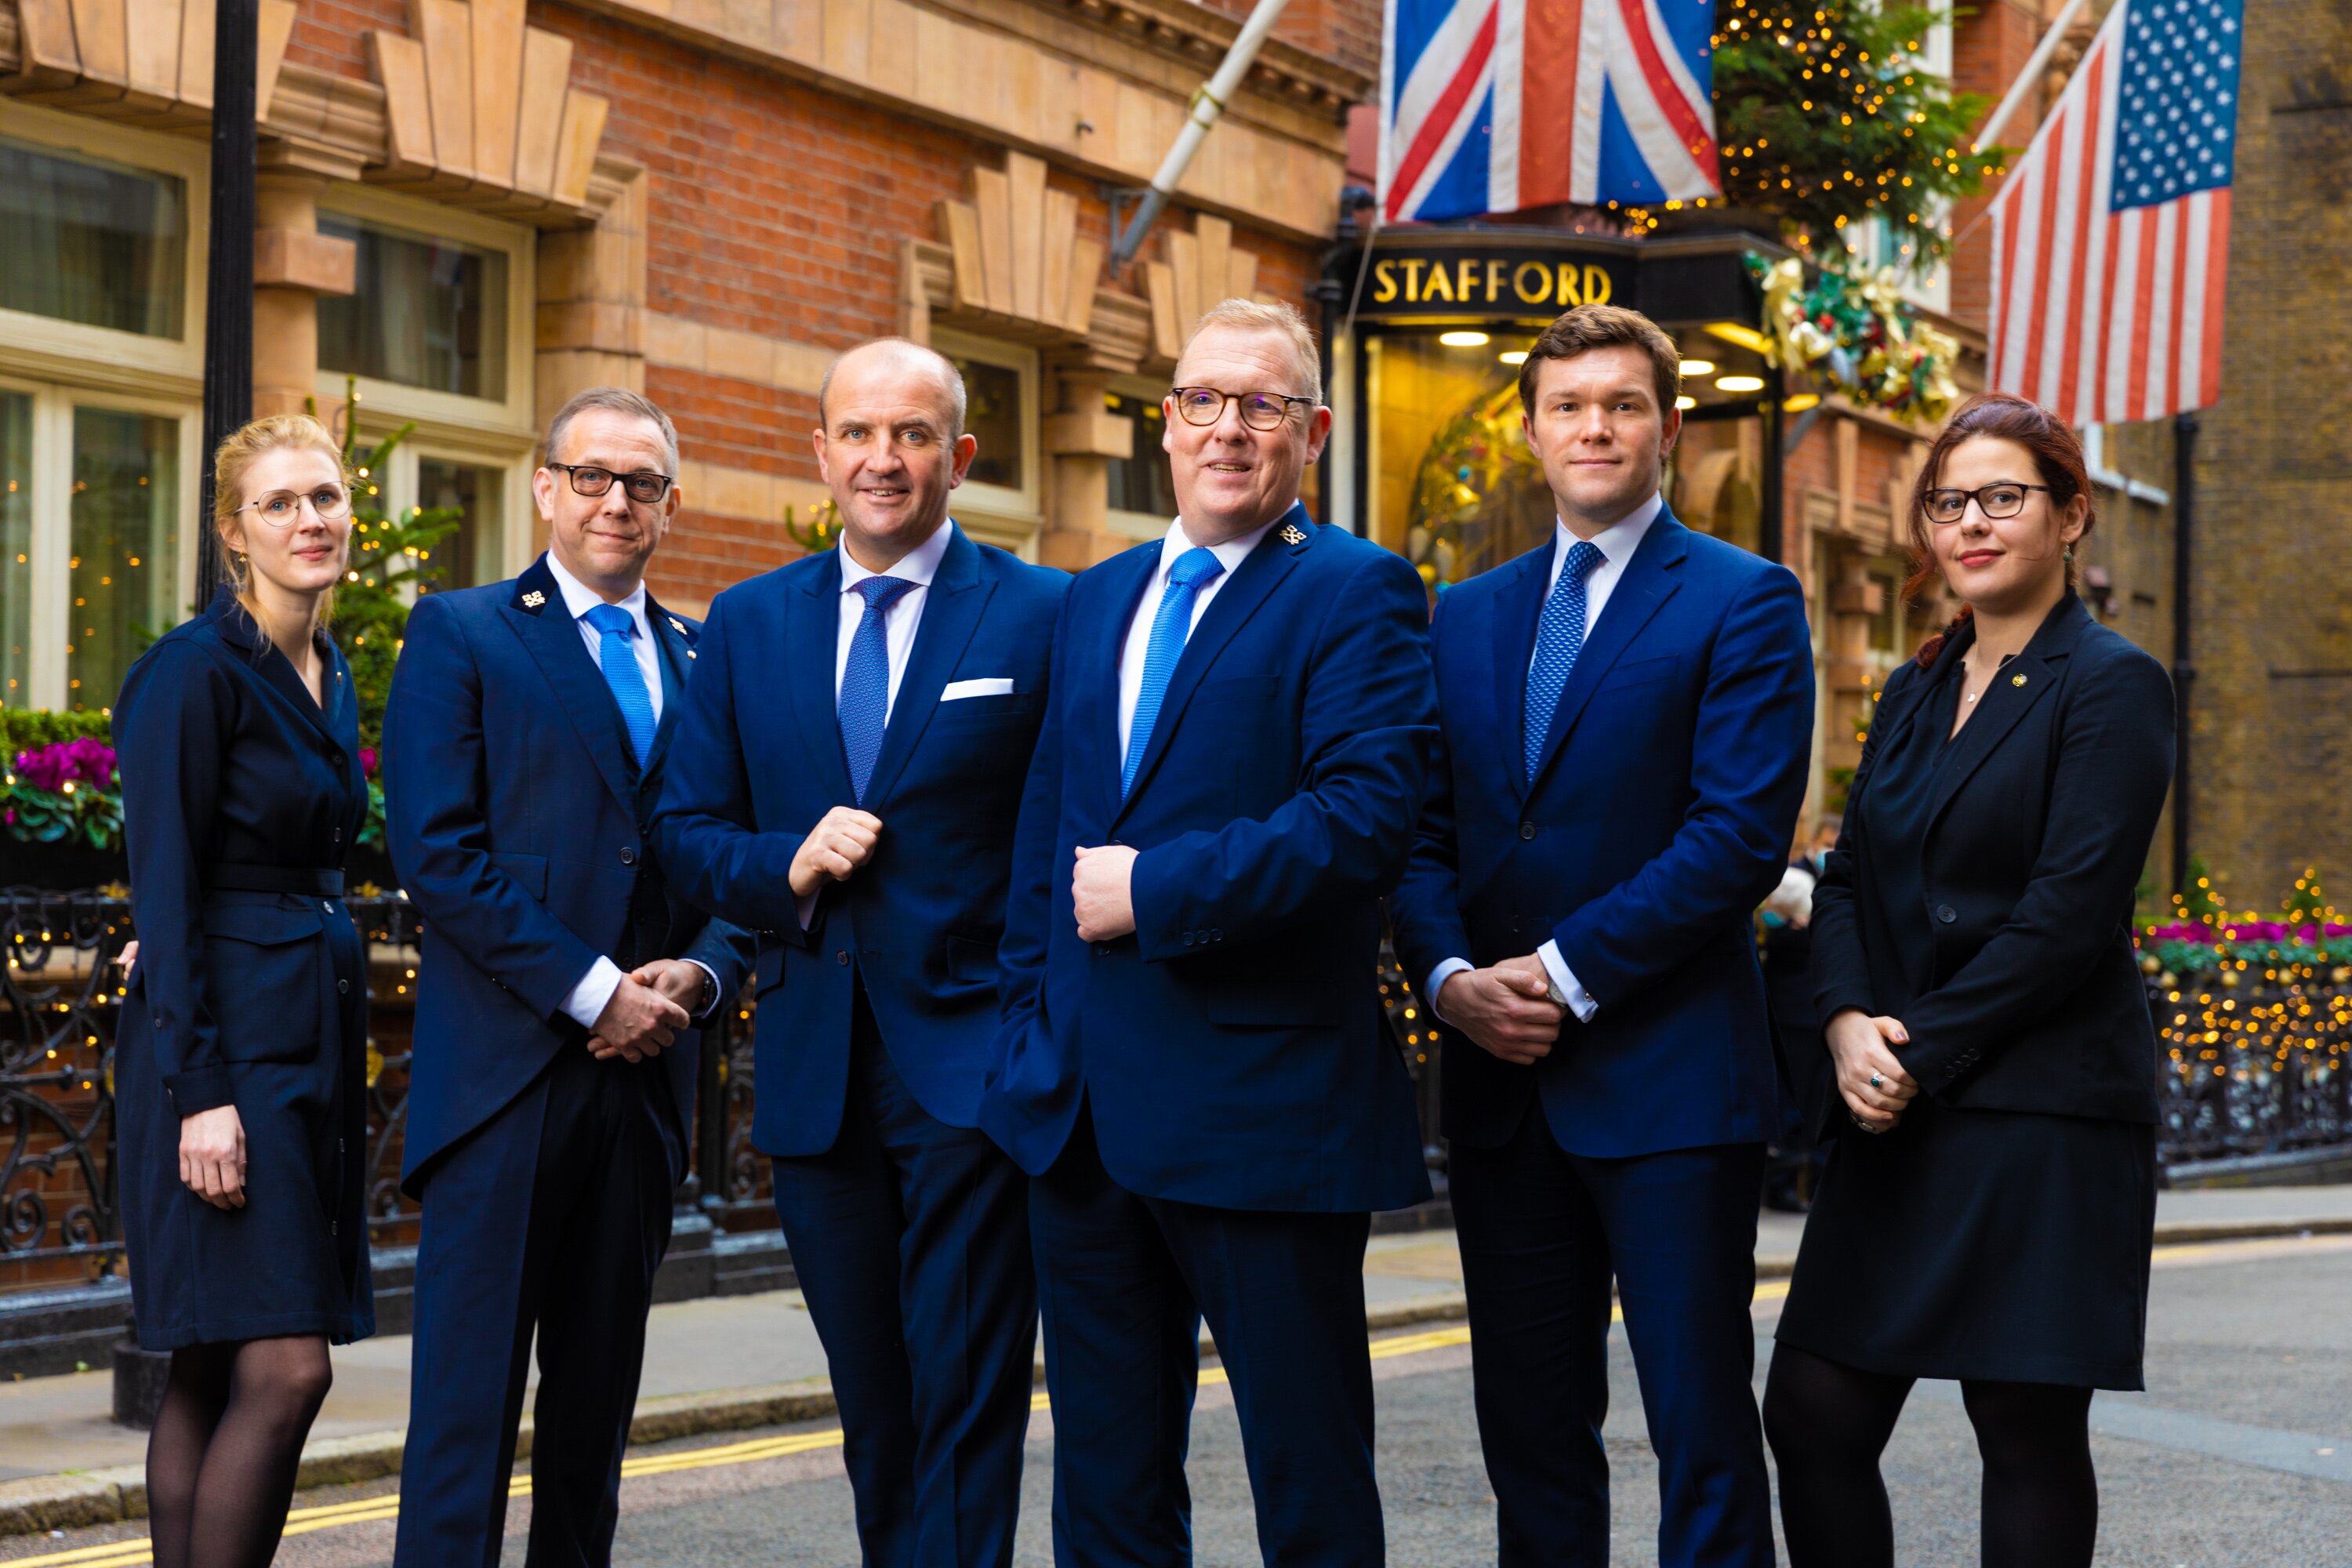 Hotel Catey-winning concierge Alan Noone joins the Stafford London